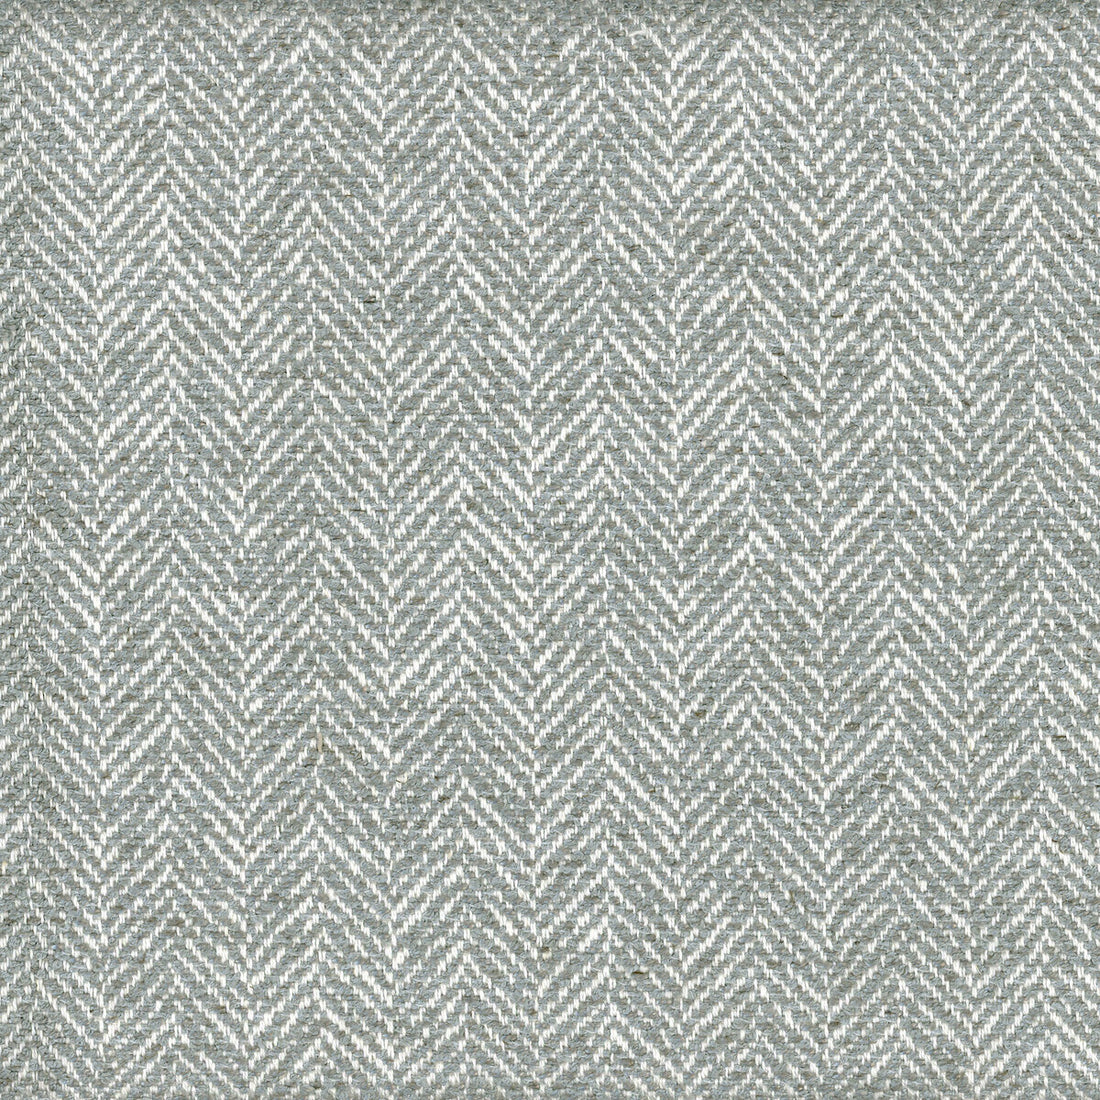 Lecce fabric in mist color - pattern AM100327.21.0 - by Kravet Couture in the Andrew Martin Salento collection